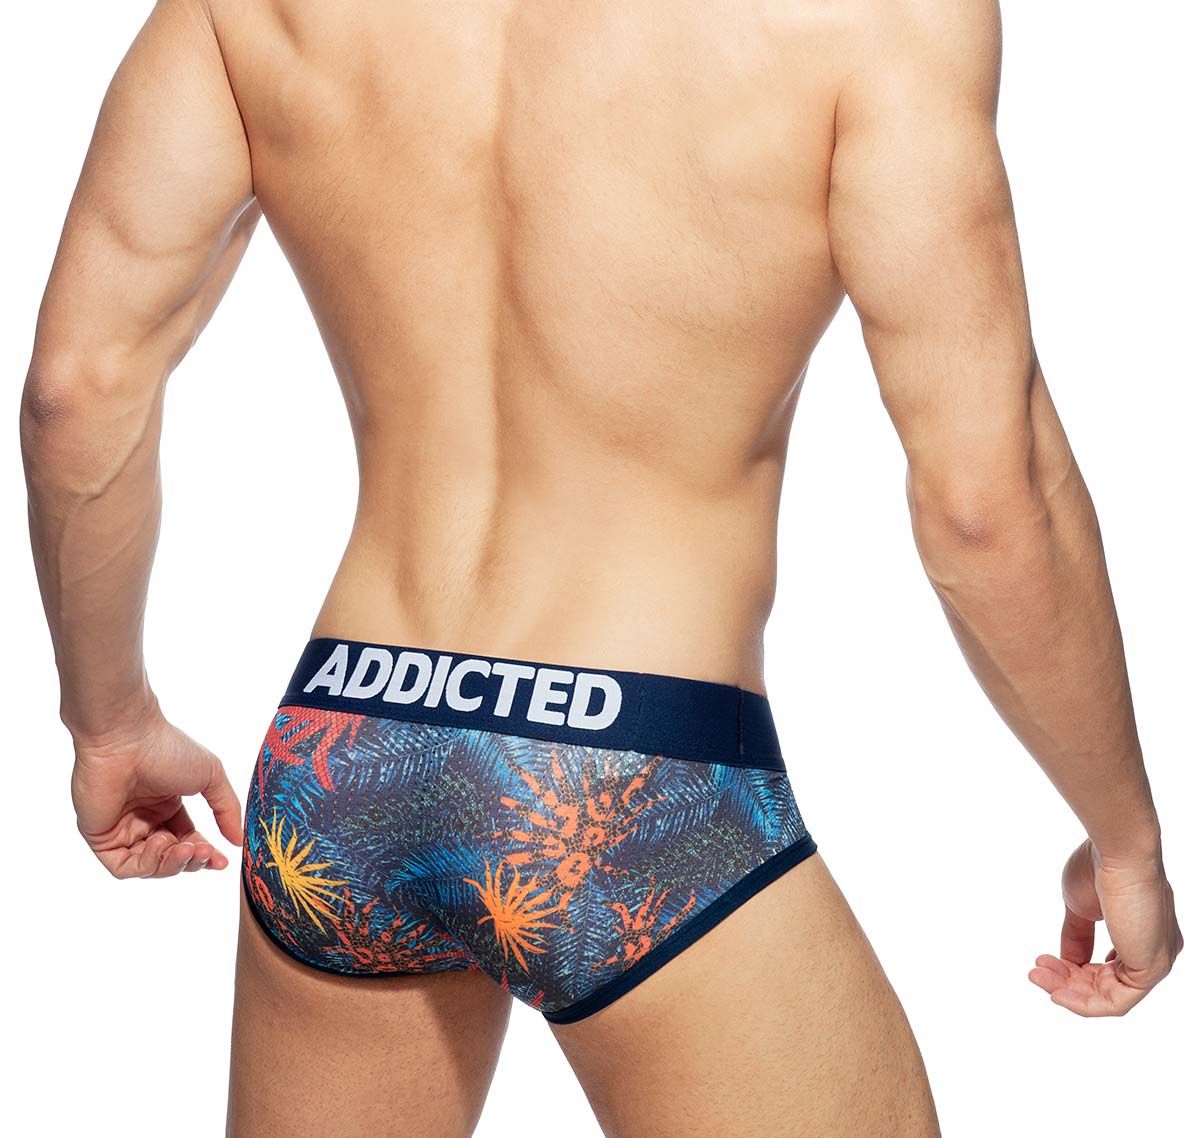 Addicted 3 Pack Briefs 3 PACK TROPICAL MESH BRIEF PUSH UP, AD889P, multicolor